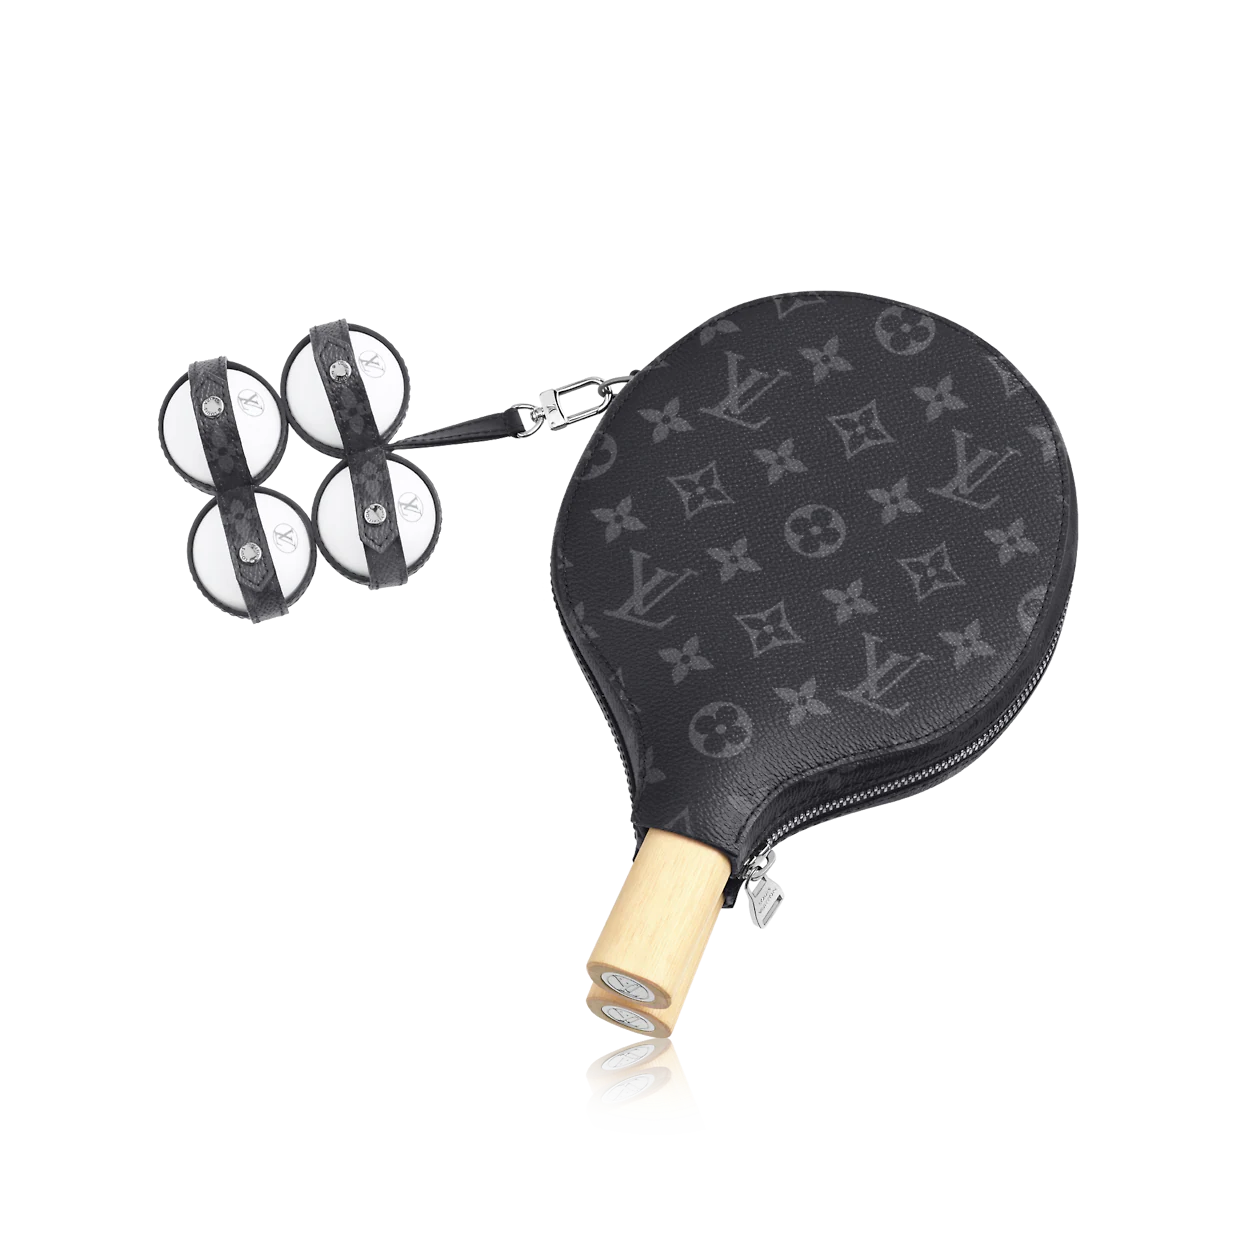 Why not treat yourself to some Louis Vuitton ping-pong bats?